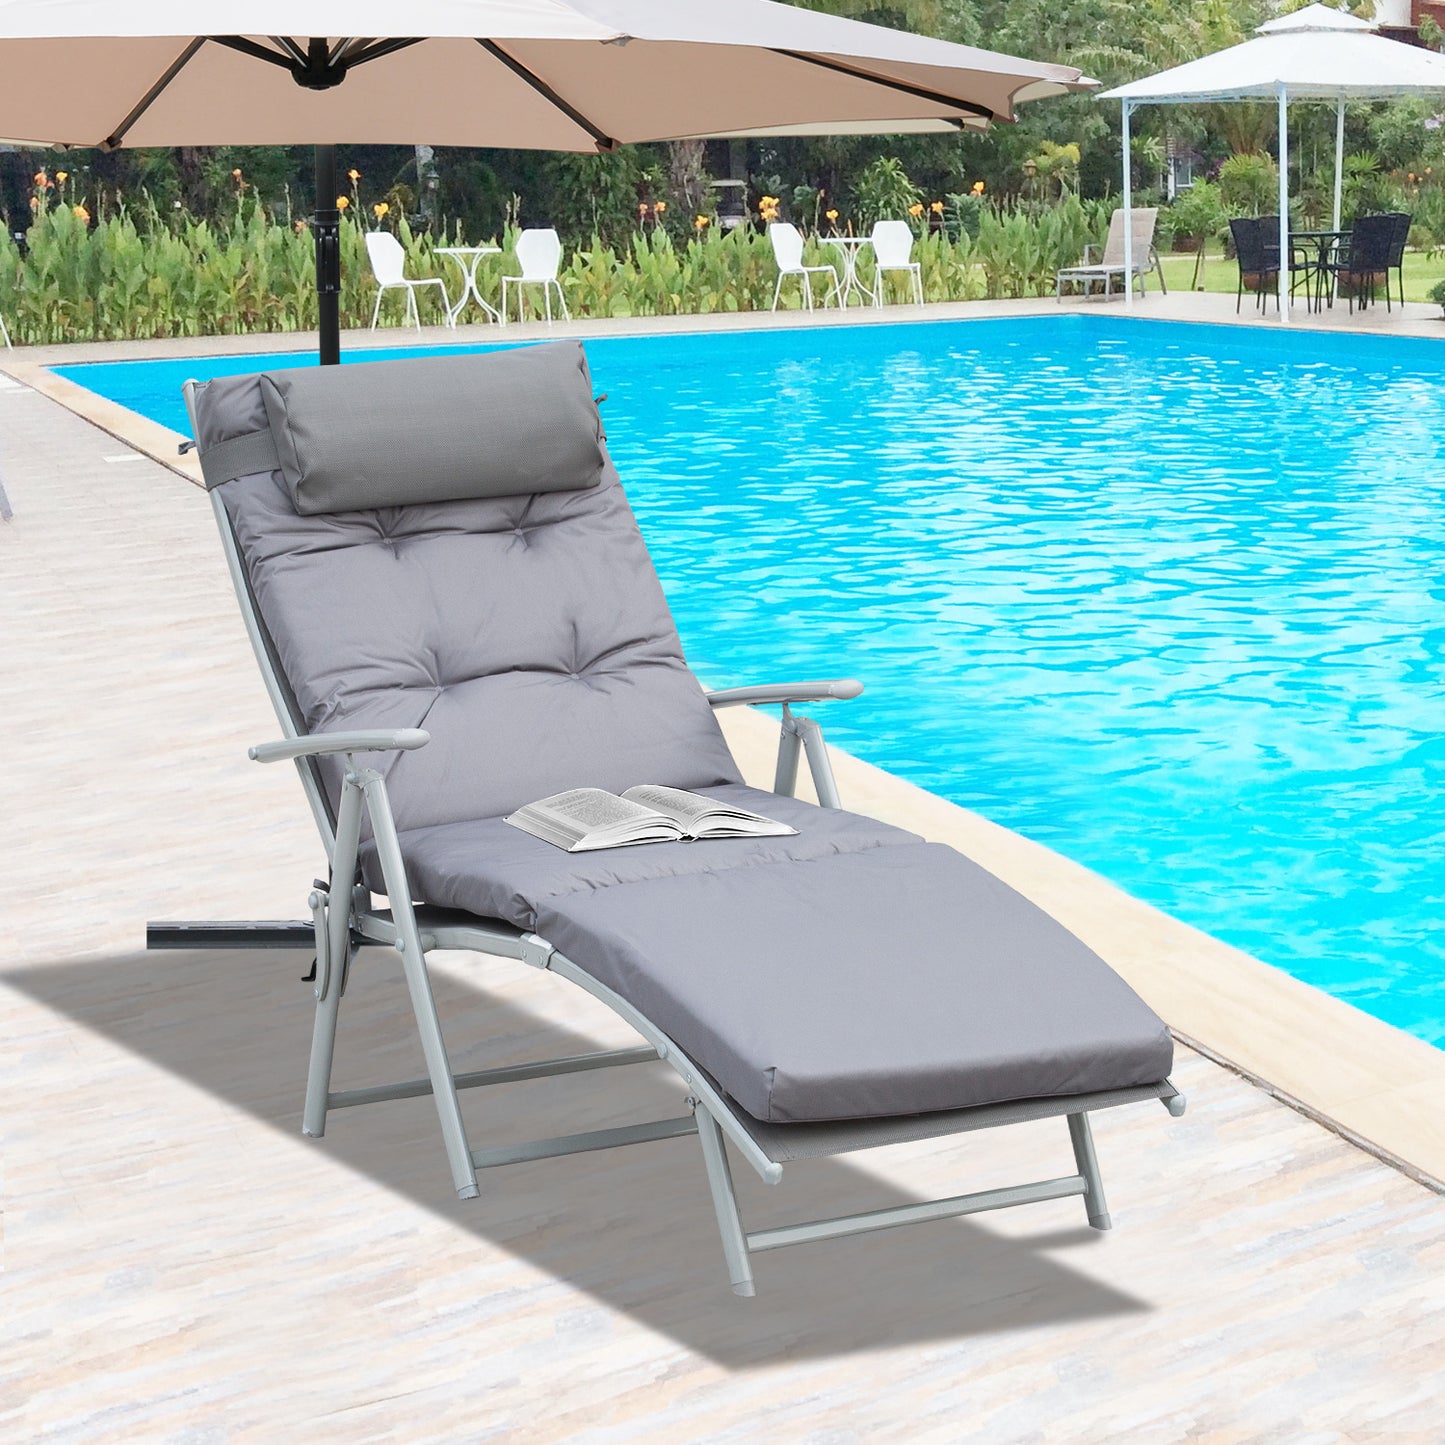 Outsunny Steel Frame Outdoor Garden Padded Sun Lounger w/ Pillow Grey